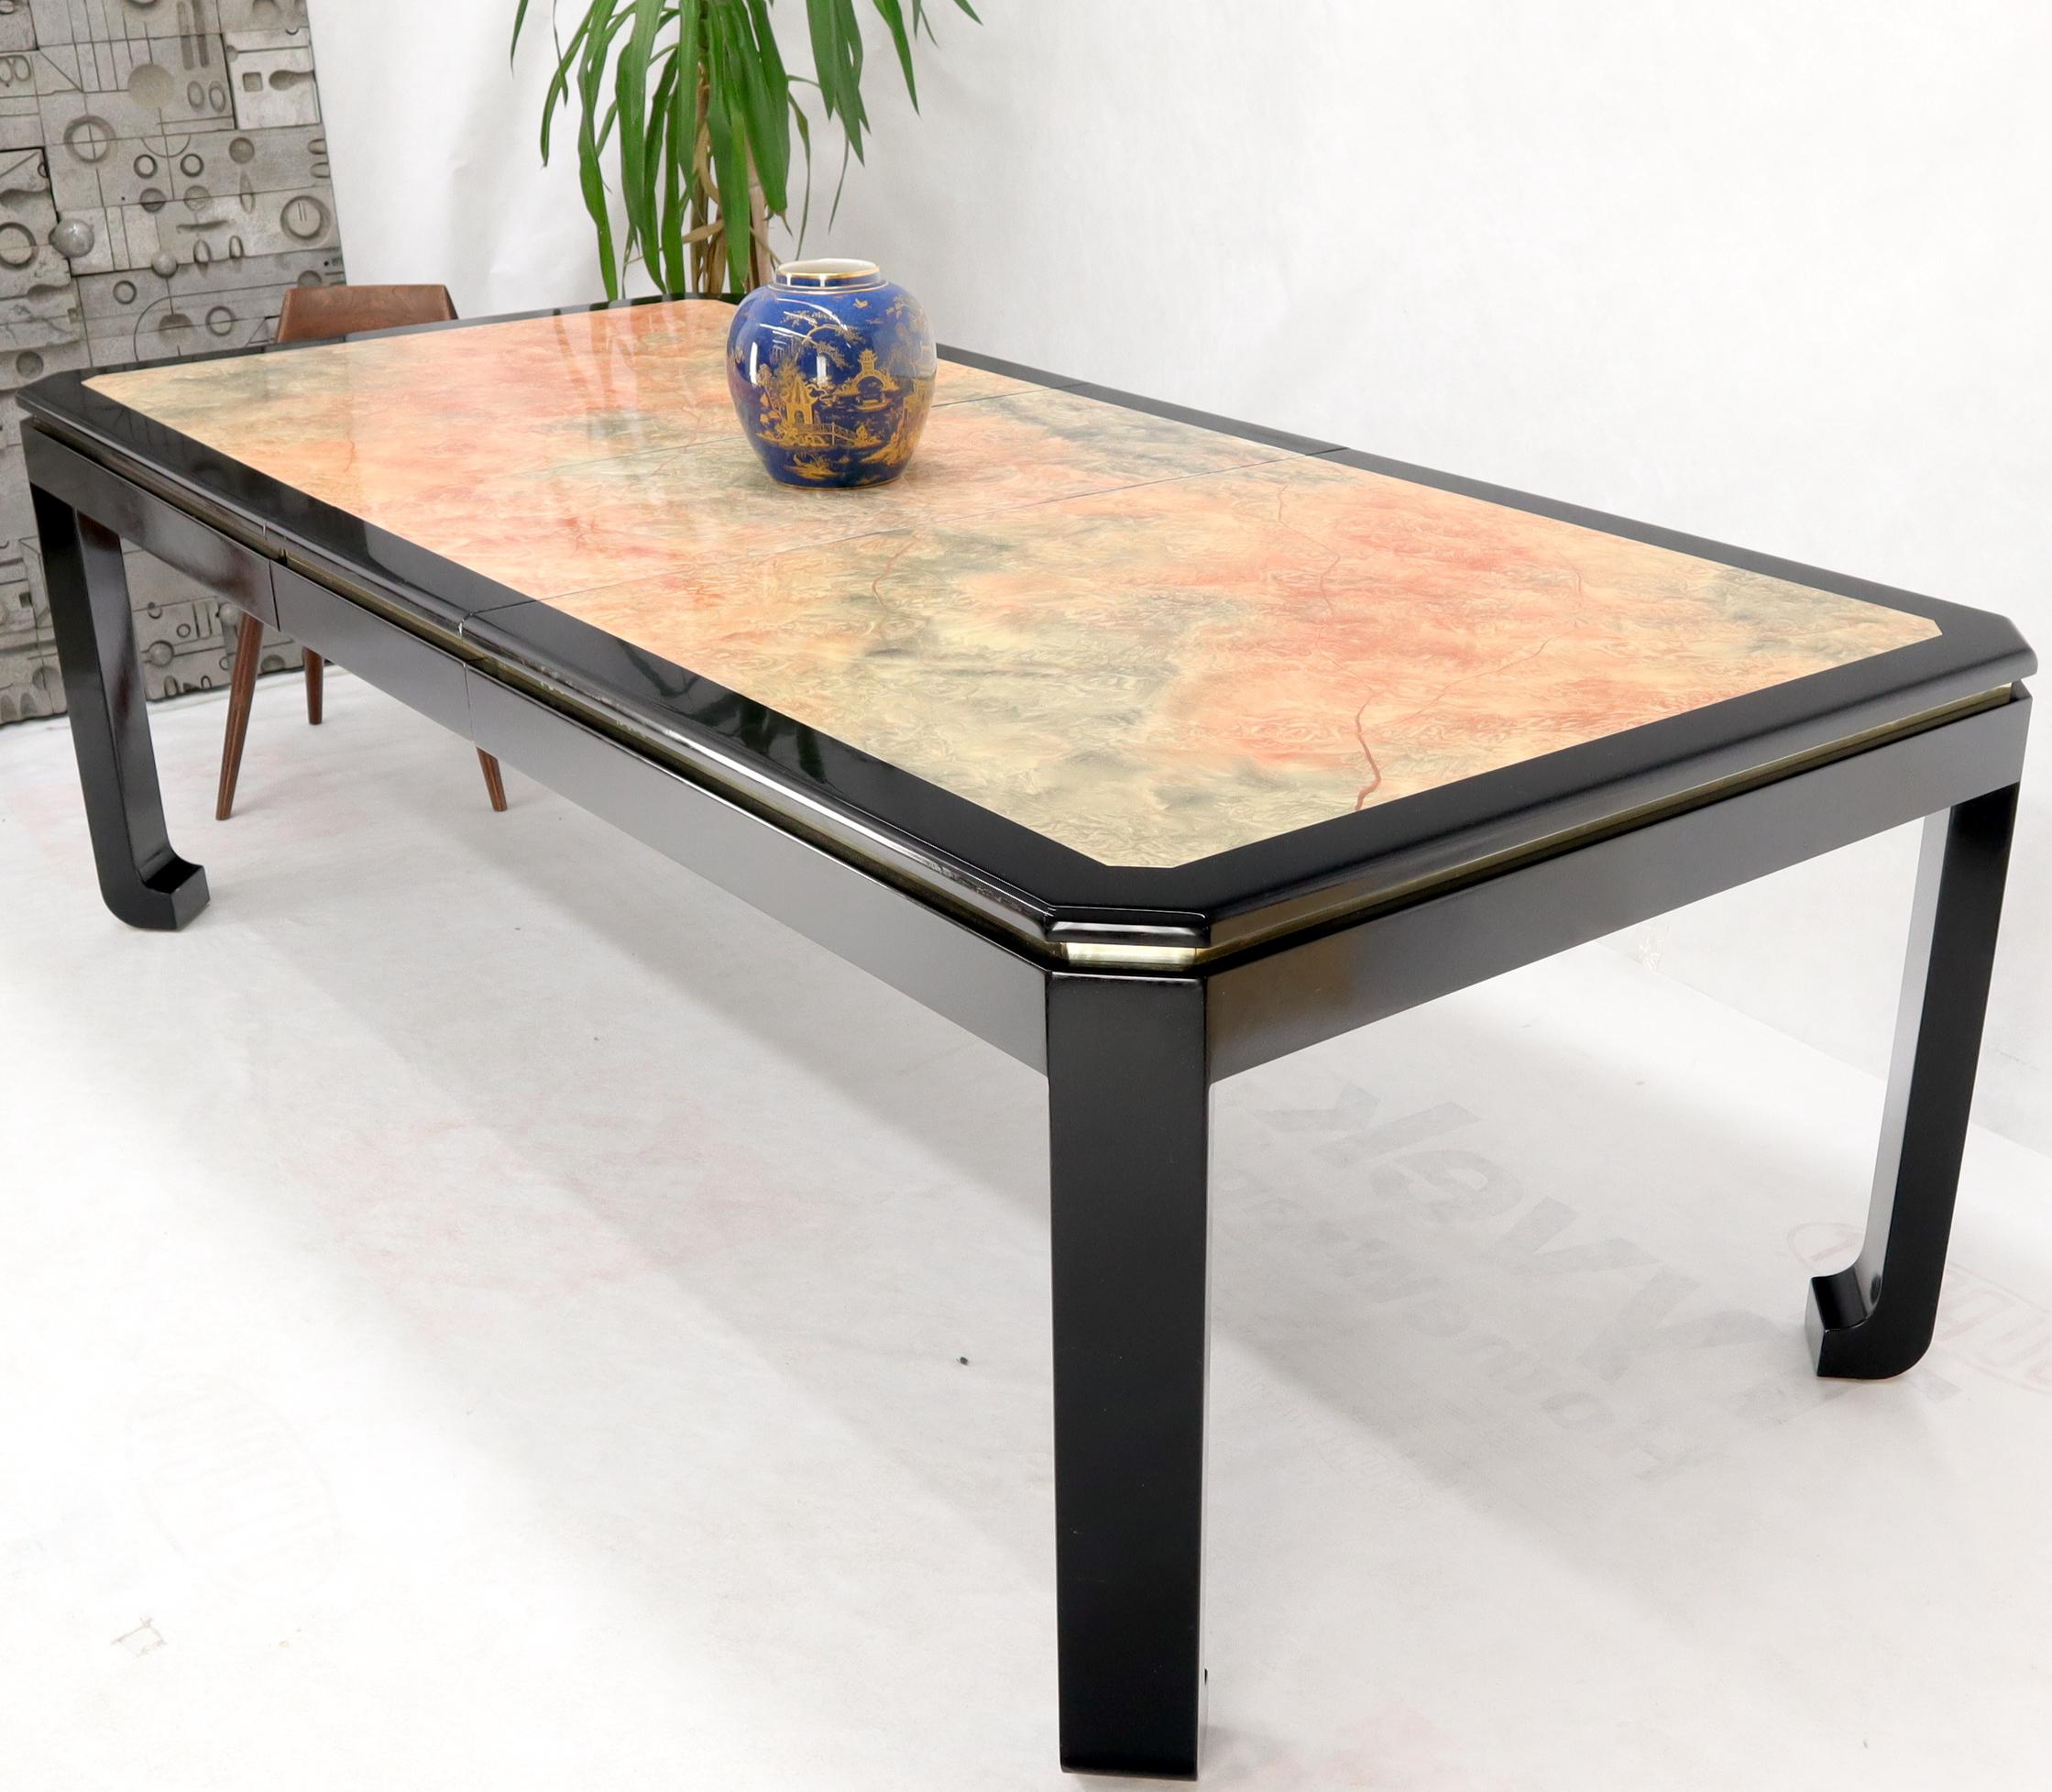 20th Century Black Lacquer Faux Stone Marble Finish Dining Table with Leave Extension Board For Sale